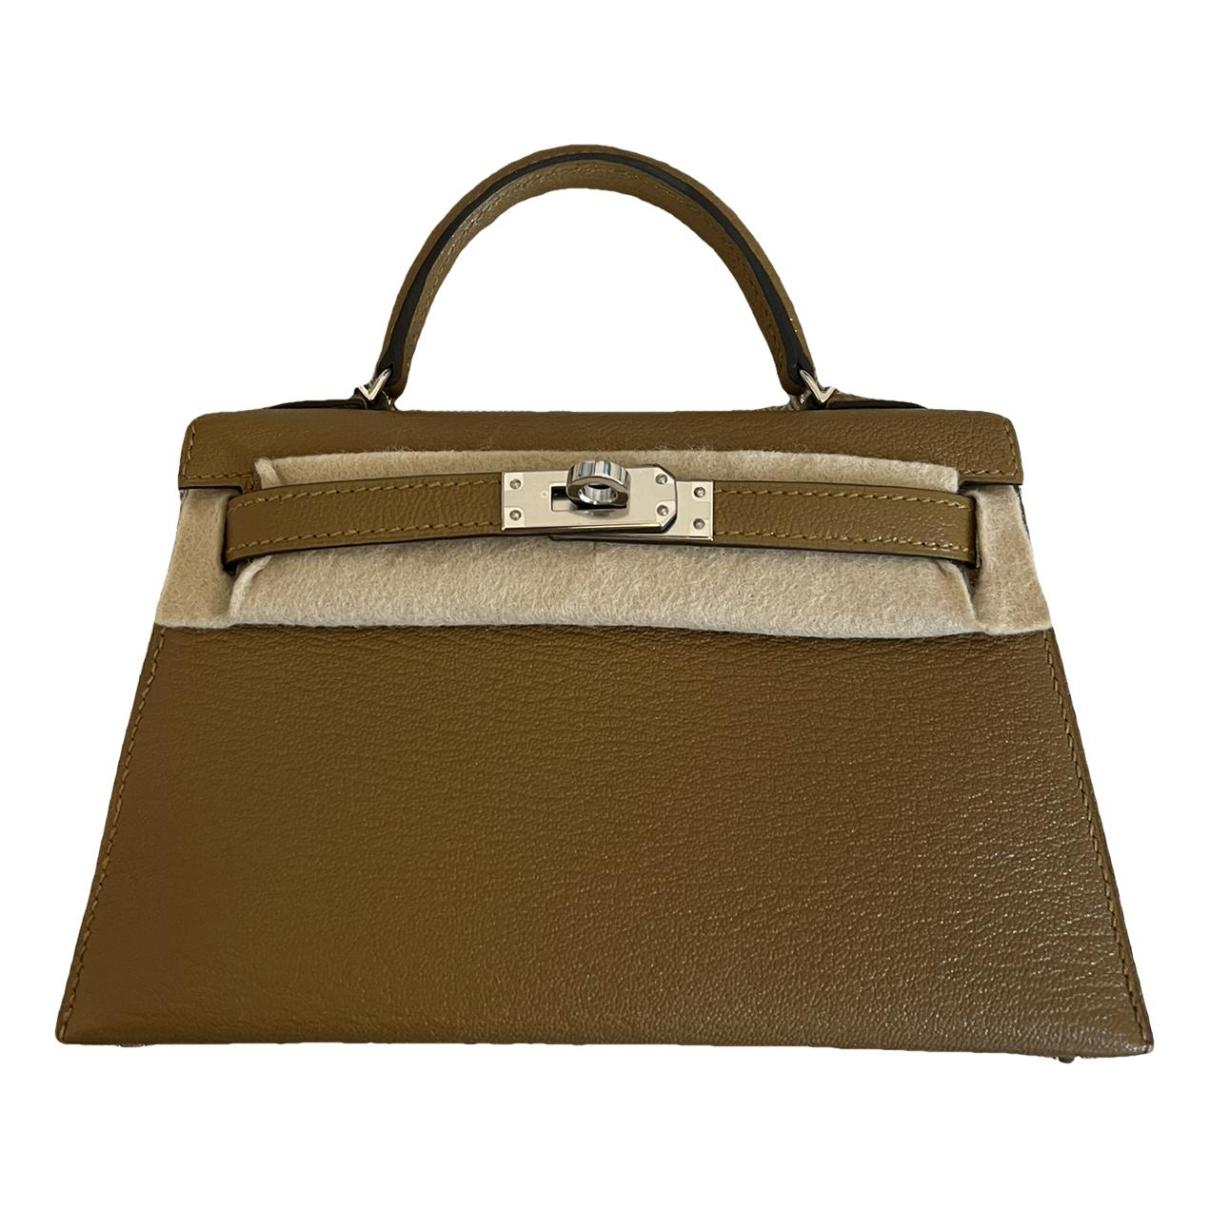 HERMÈS Kelly Mini Leather Exterior Bags & Handbags for Women for sale